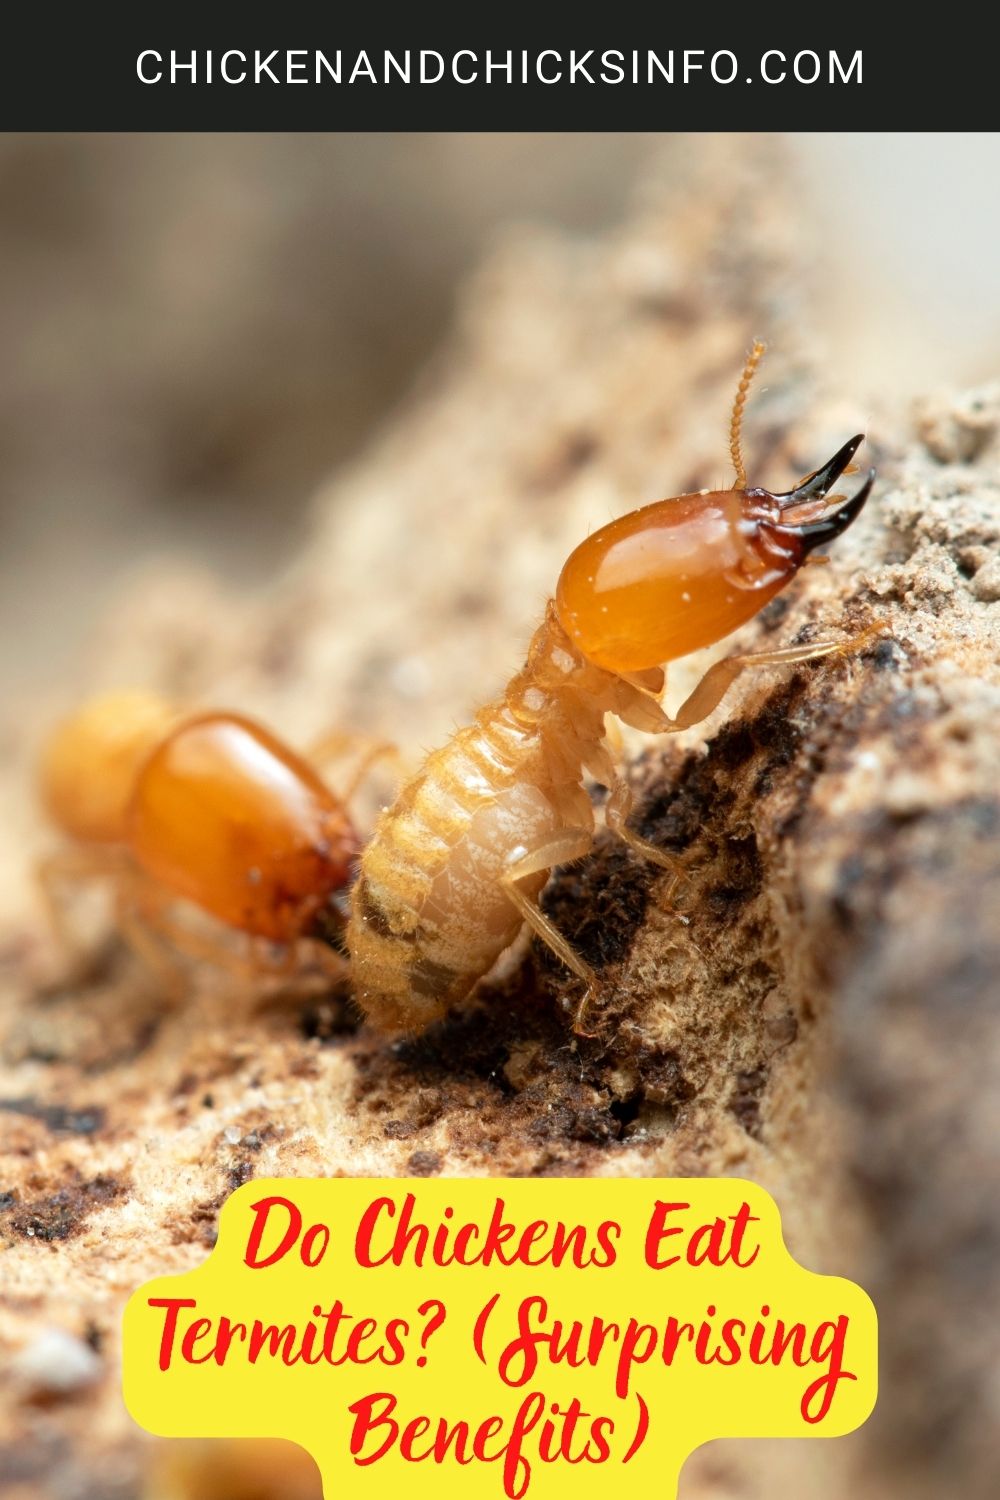 Do Chickens Eat Termites? (Surprising Benefits) poster.
